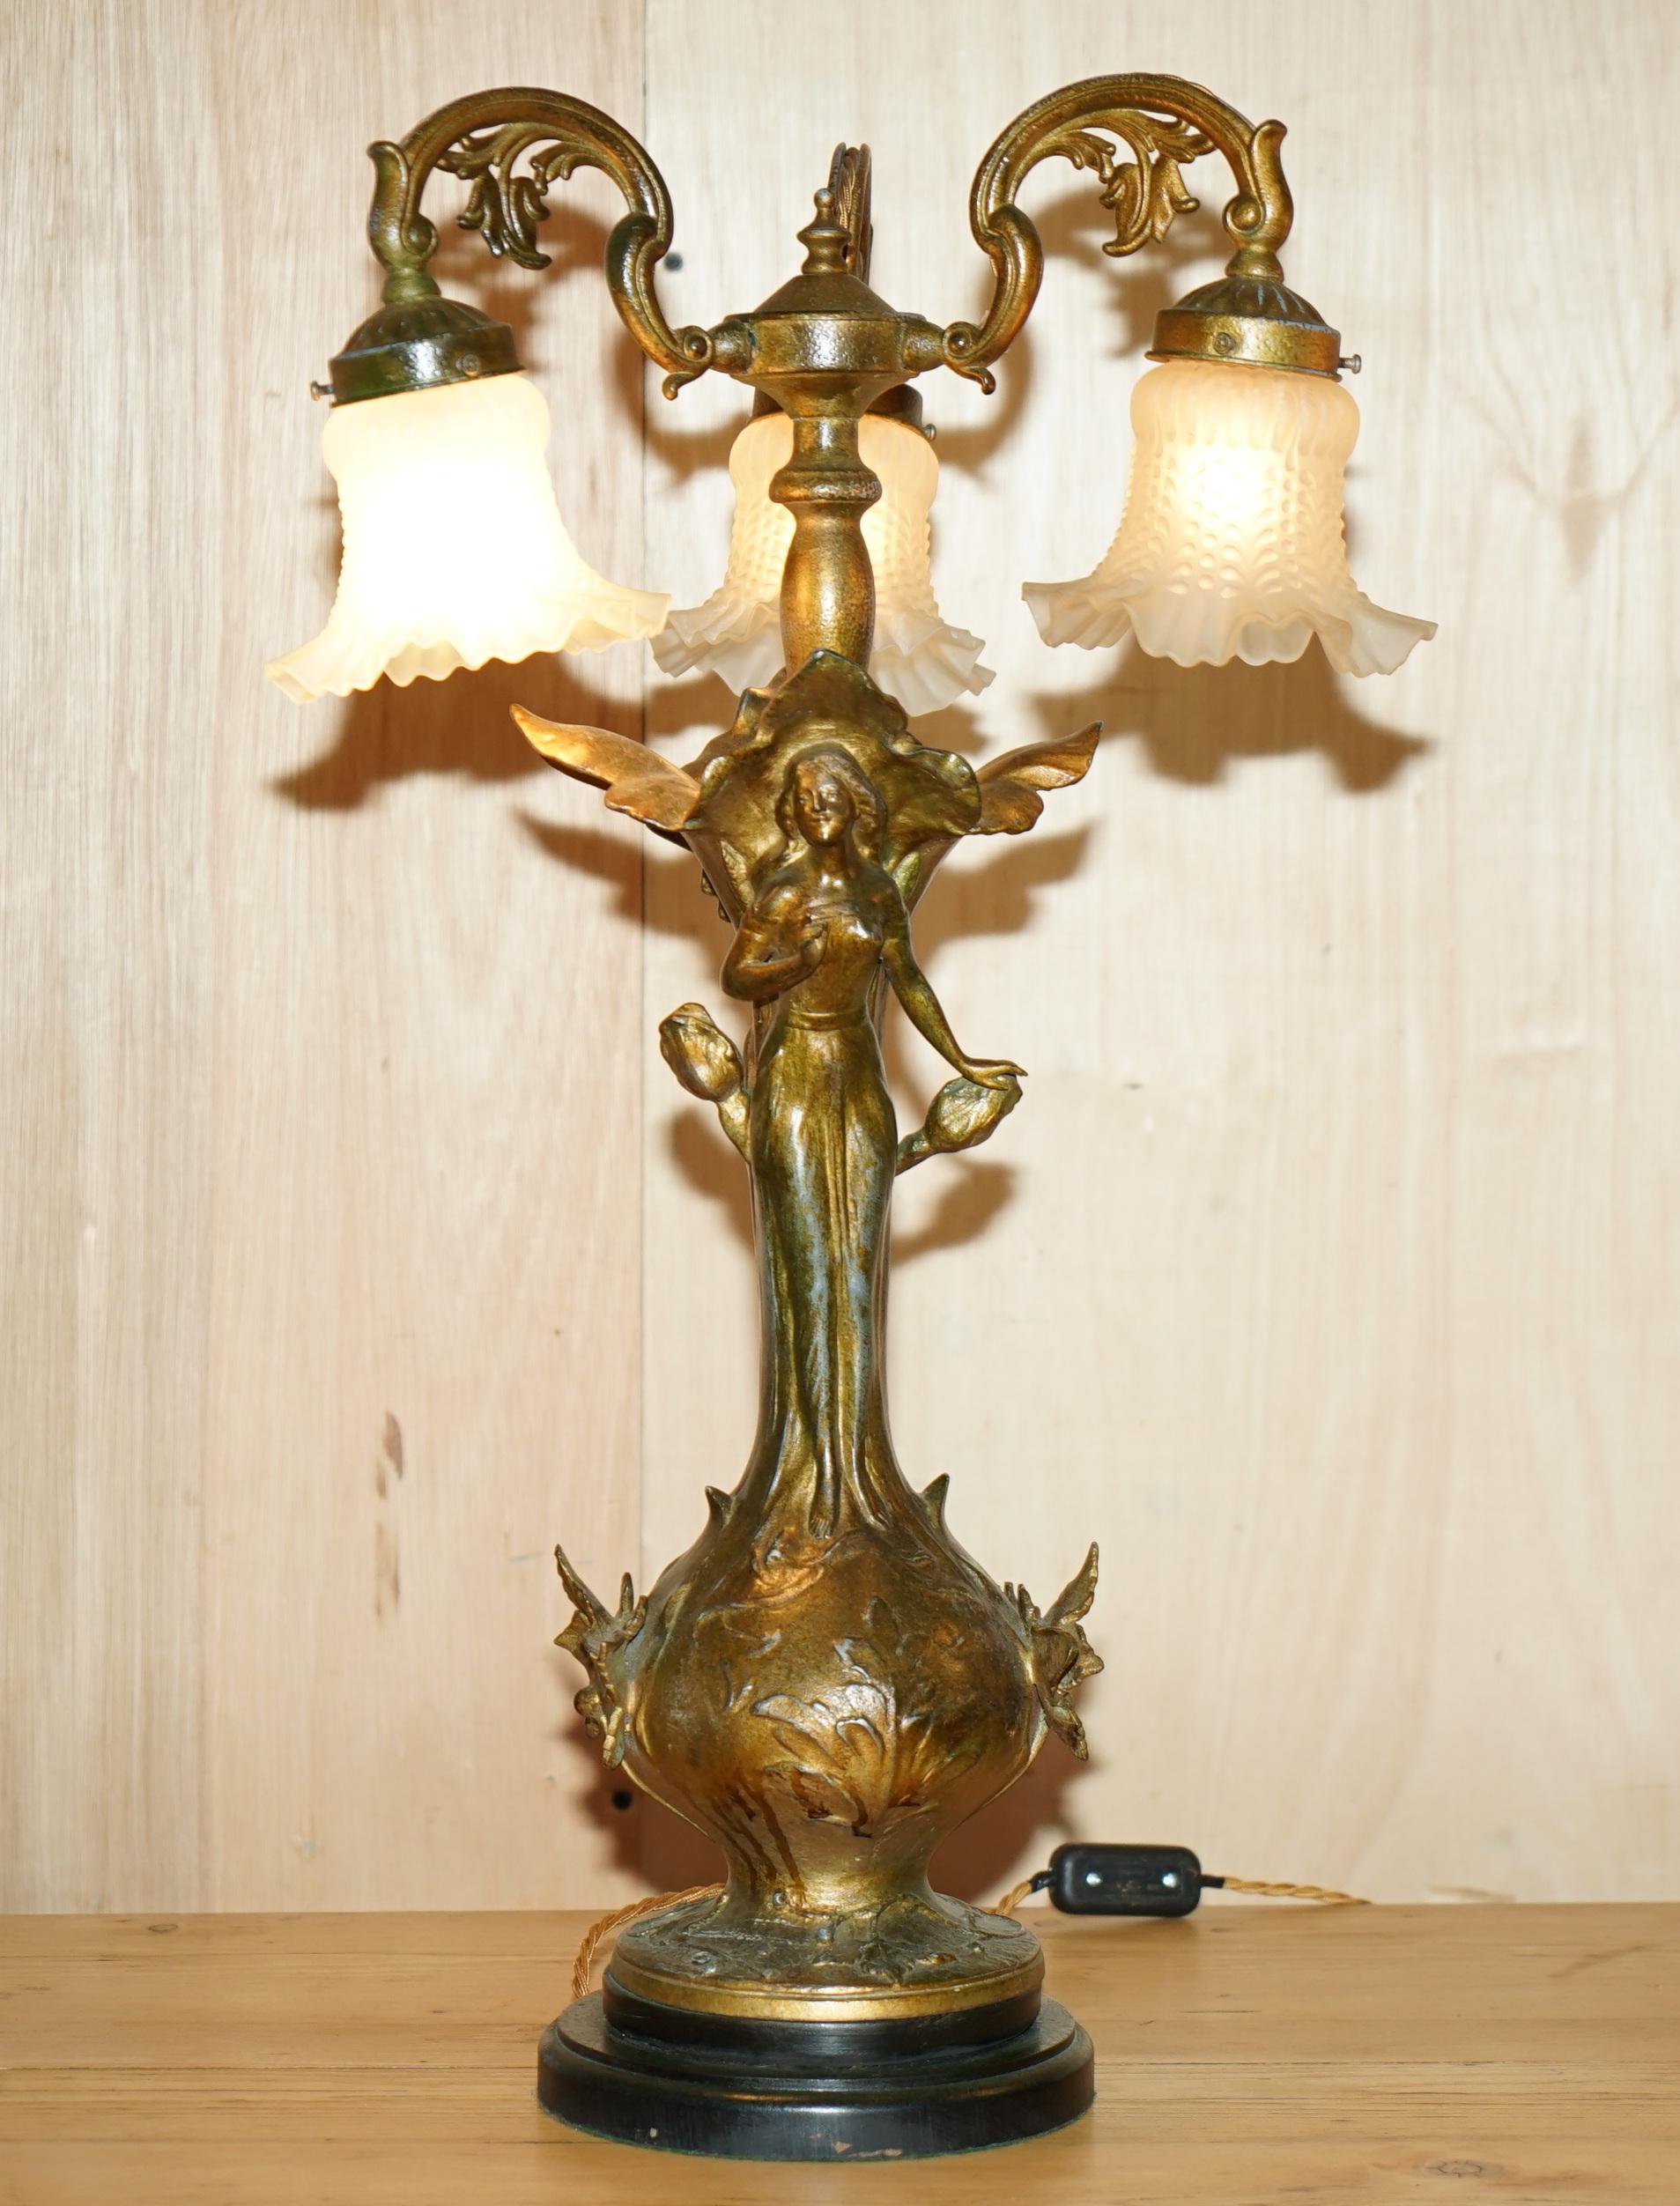 Royal House Antiques

Royal House Antiques is delighted to offer for sale this stunning pair of vintage circa 1920's French Art Nouveau maiden lamps with the original shades and bronzed finish 

They are in absolutely stunning condition, fully